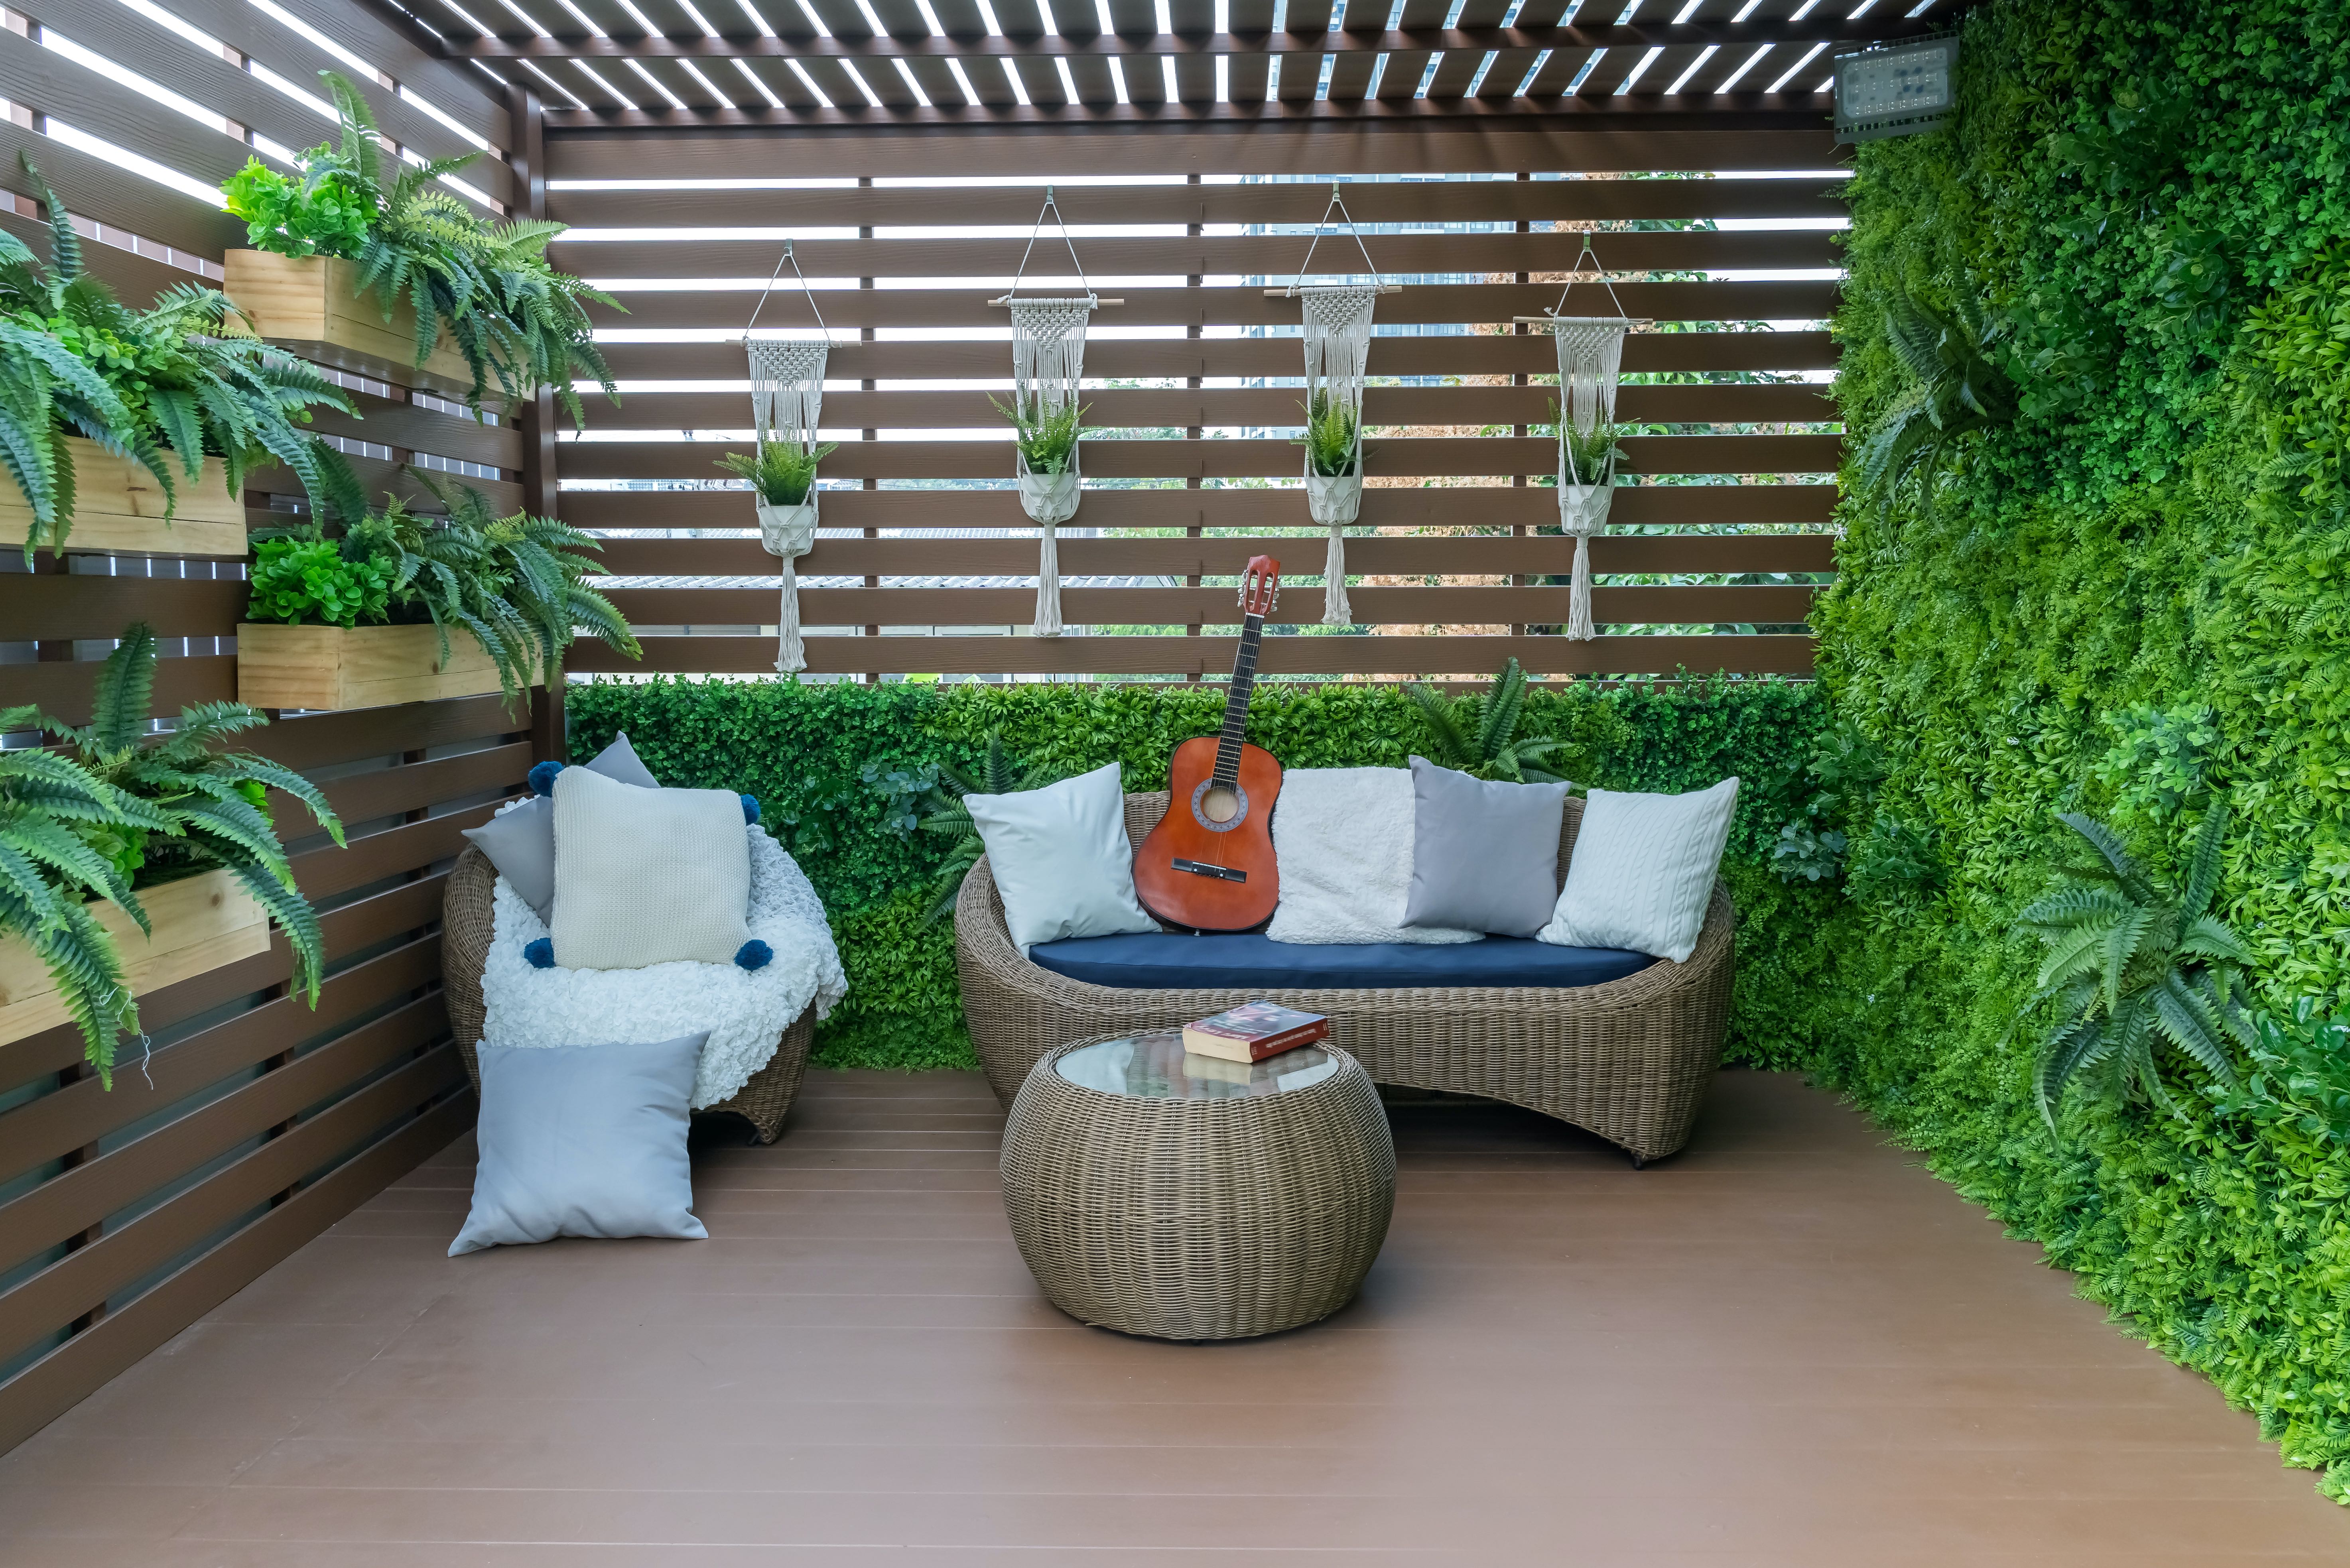 living wall in an outdoor space